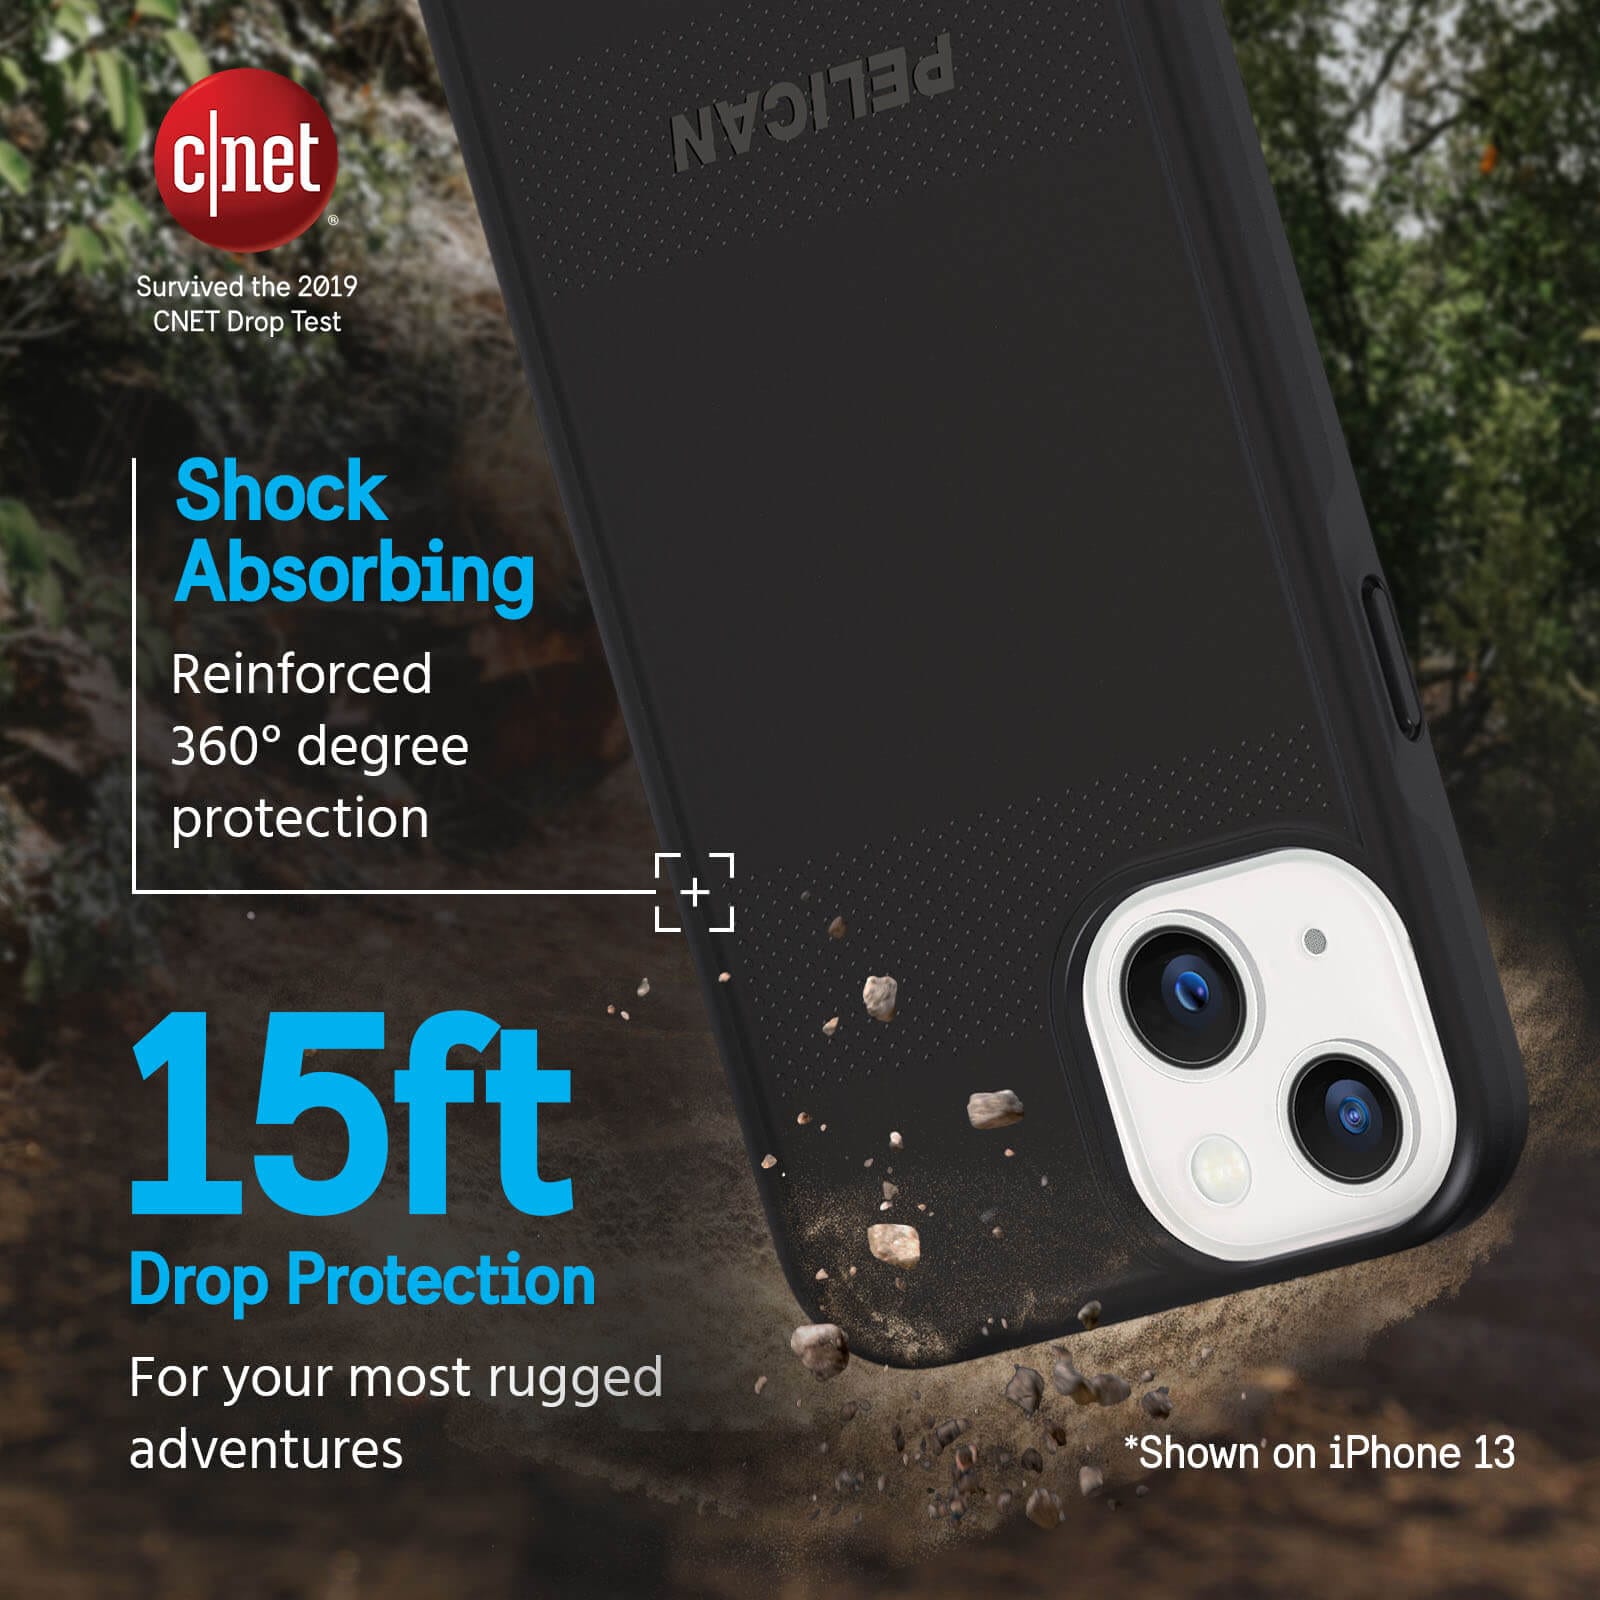 Survived the 2019 CNET Drop Test. Shock absorbing reinforced 360 degree protection. 15ft drop protection for your most rugged adventures. *shown on iphone 13. color::Black